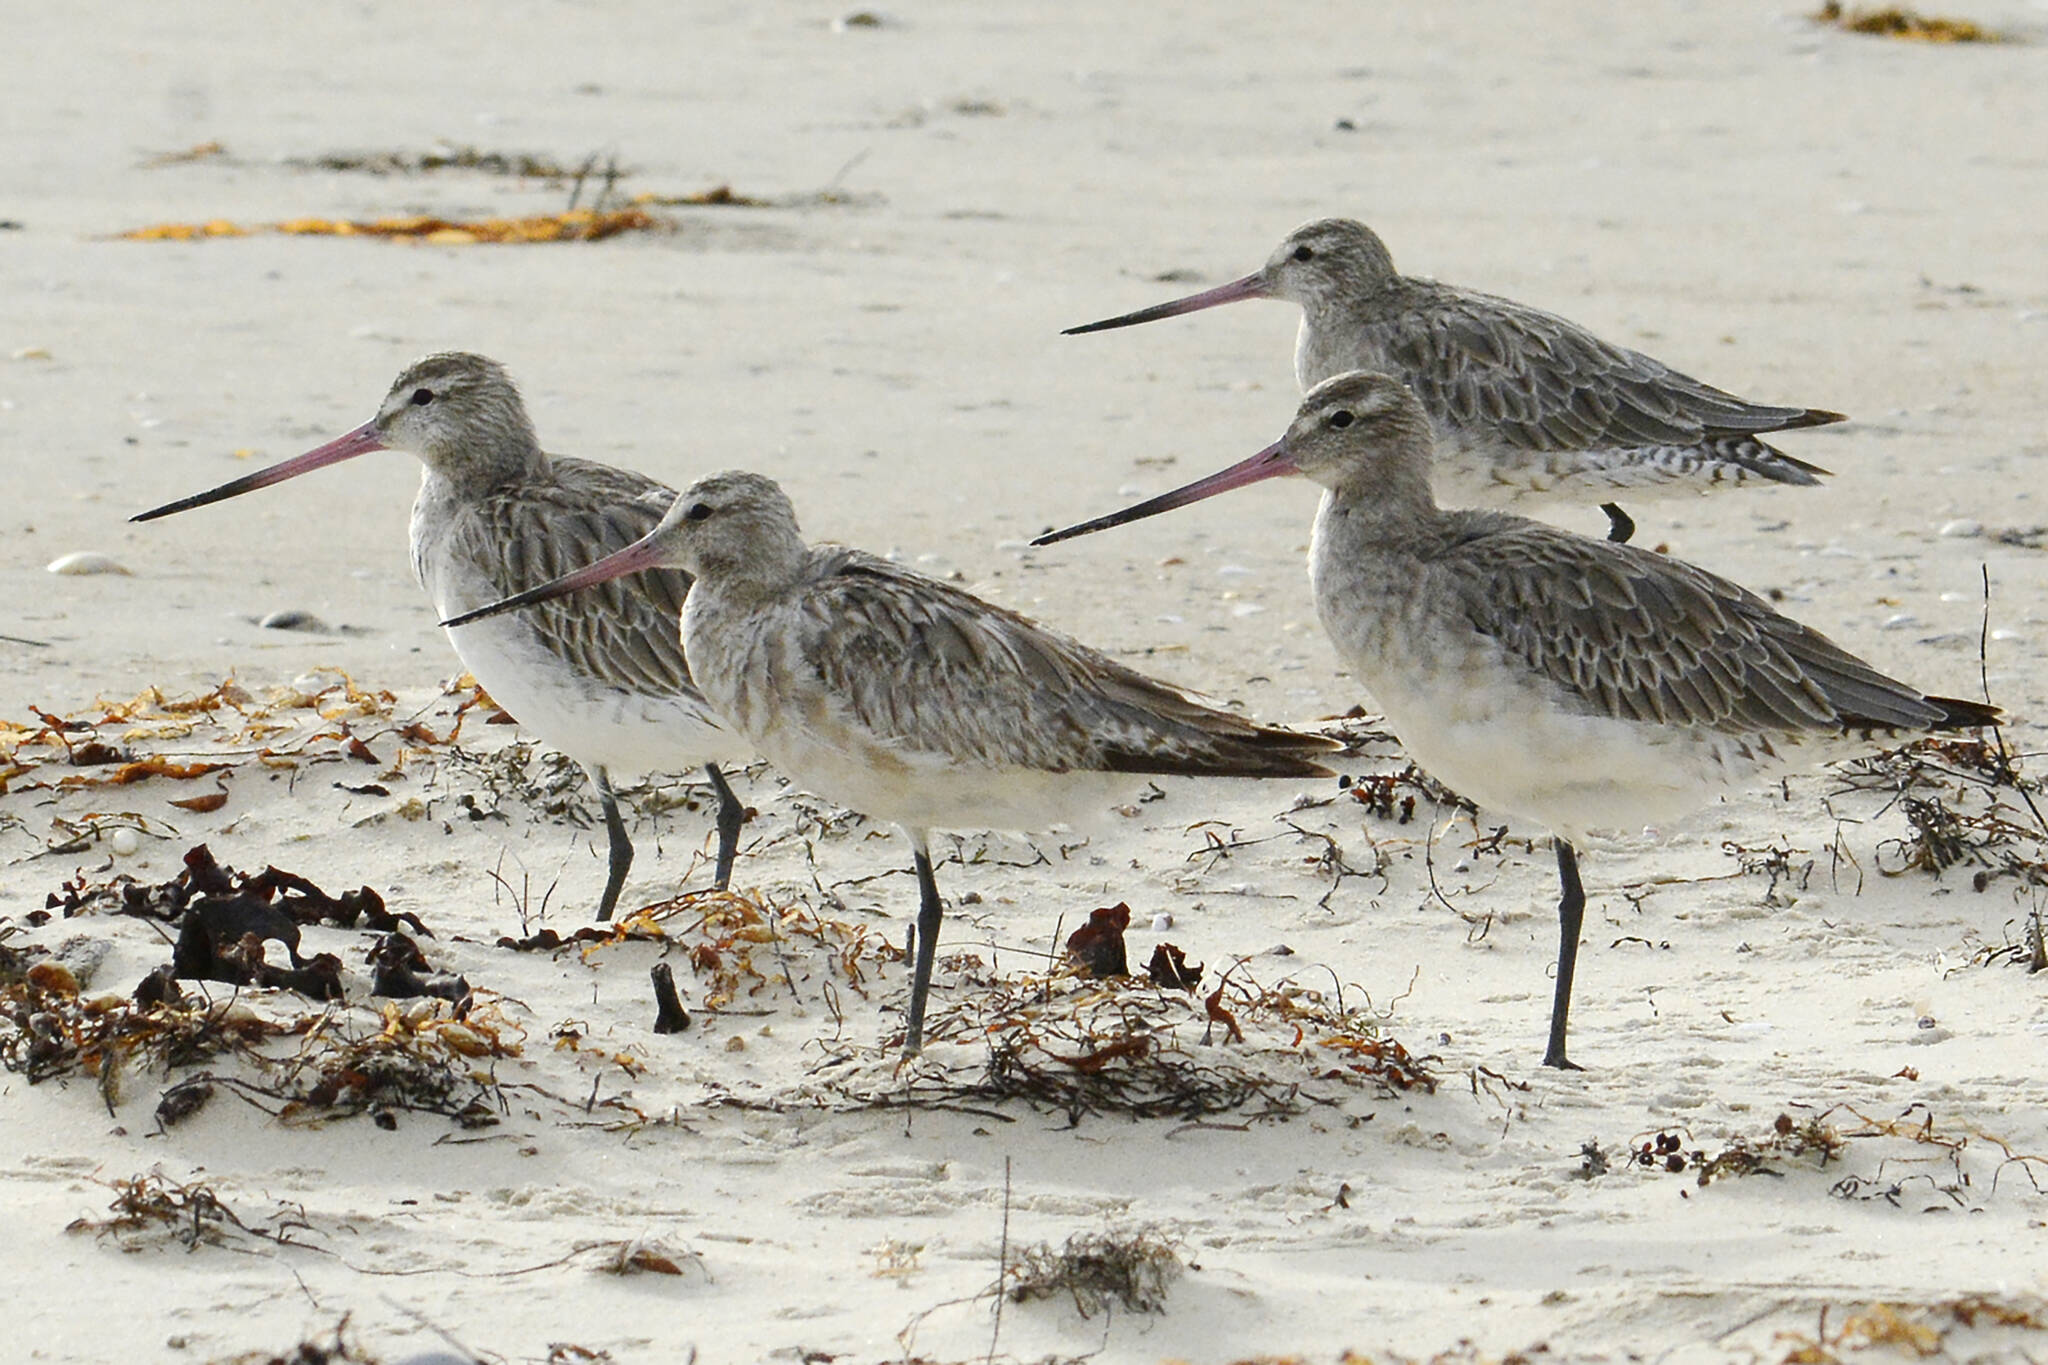 Bar-tailed godwits stand on the beach at Marion Bay in Australia’s Tasmania state on Feb. 17, 2018. A young bar-tailed godwit appears to have set a non-stop distance record for migratory birds by flying at least 13,560 kilometers (8,435 miles) from Alaska to the Australian state of Tasmania, a bird expert said Friday, Oct. 28, 2022. (Eric Woehler)